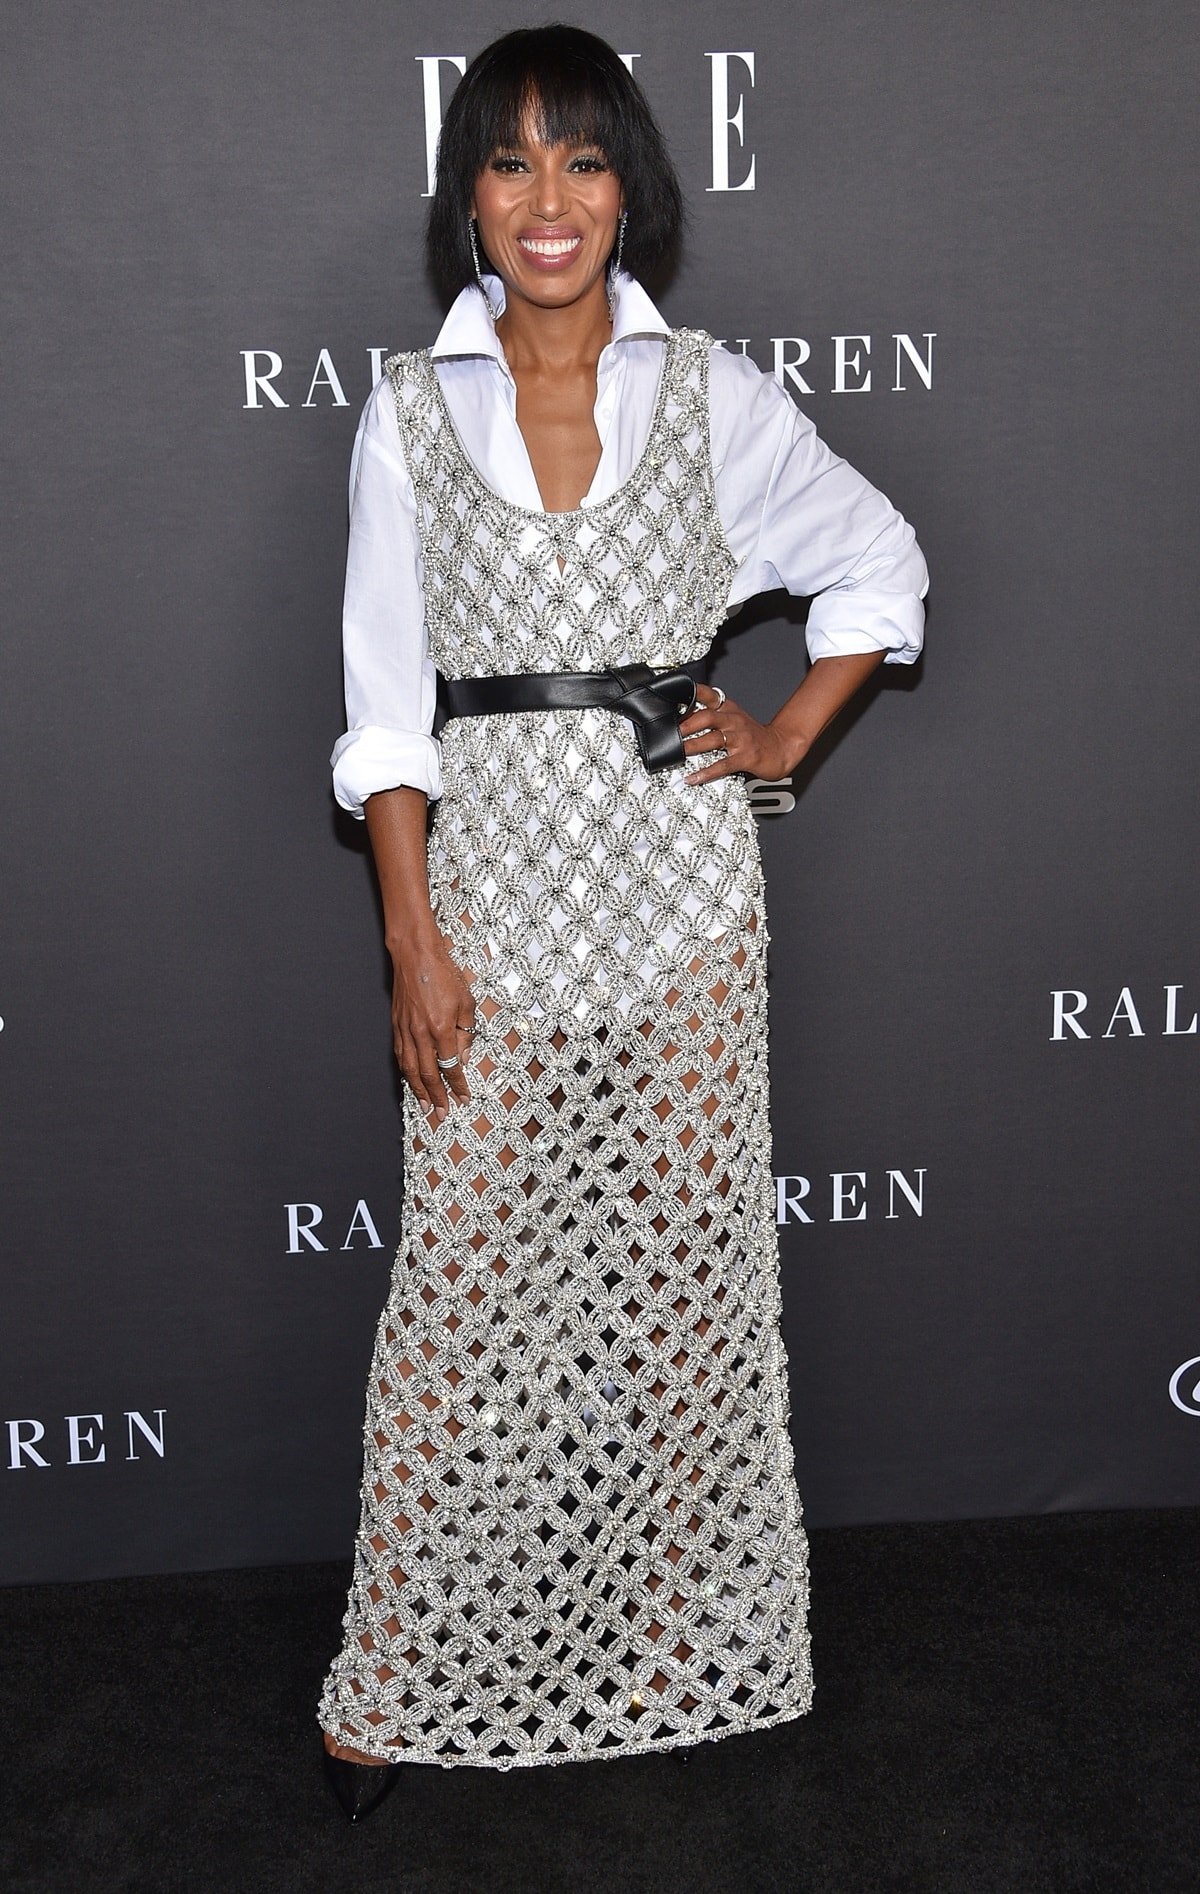 Kerry Washington made a stylish entrance at Elle's Women in Hollywood Gala in a stunning chainmail gown